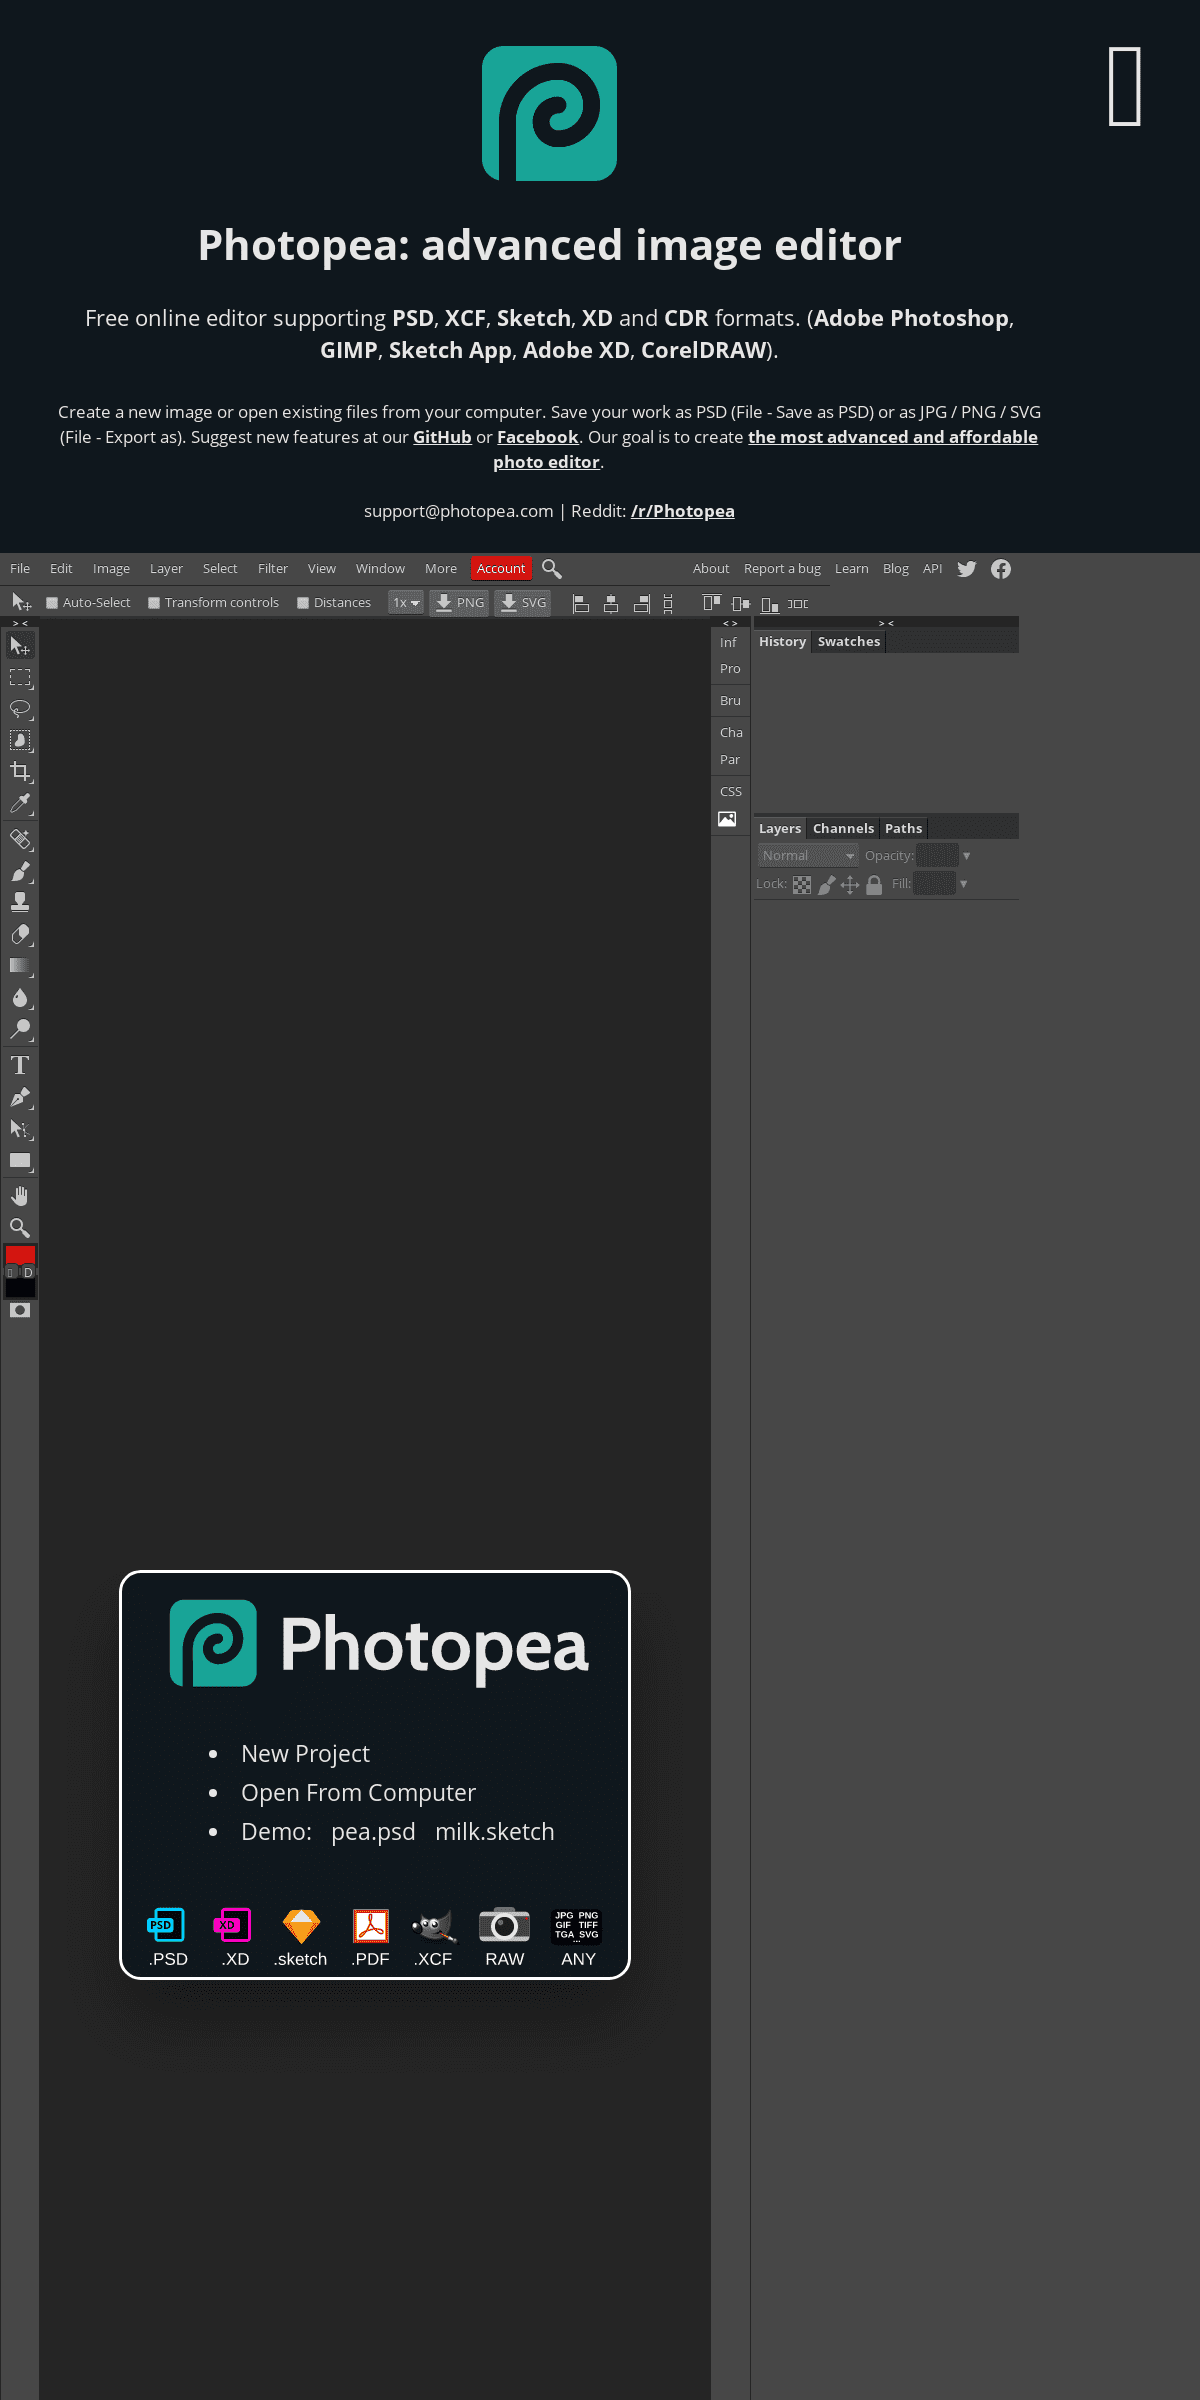 A complete backup of photopea.com